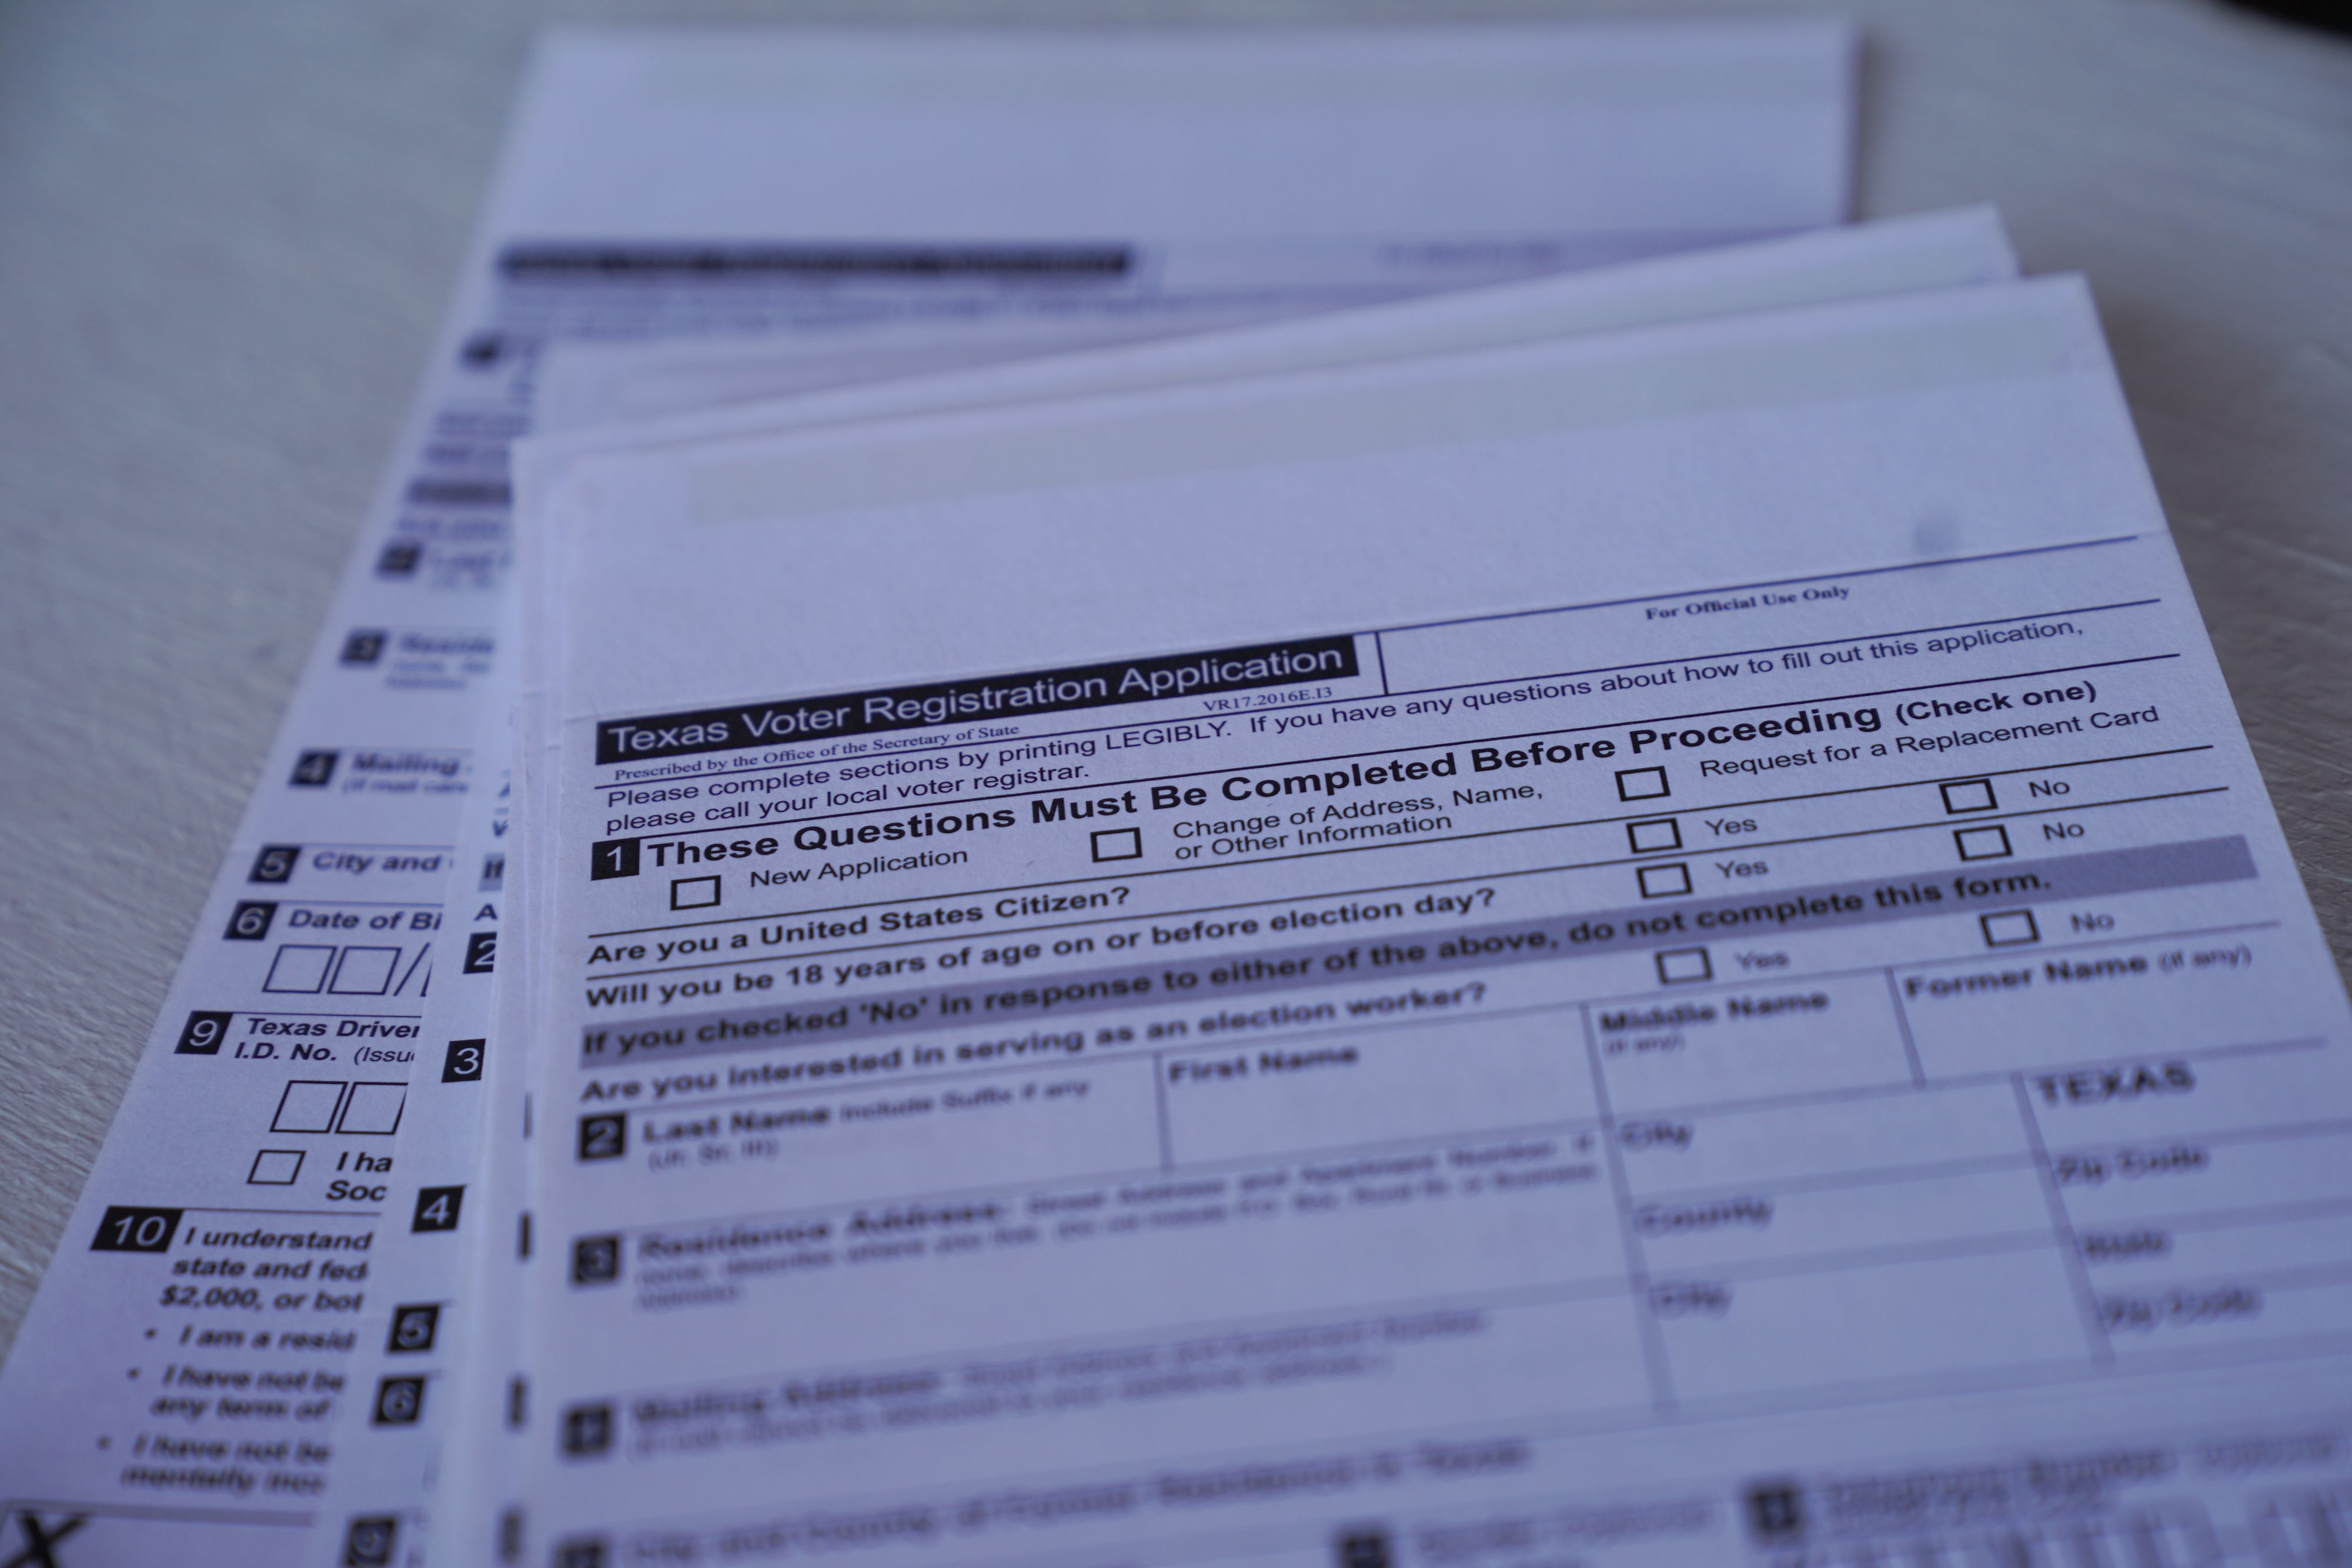 A stack of blank Texas voter registration forms